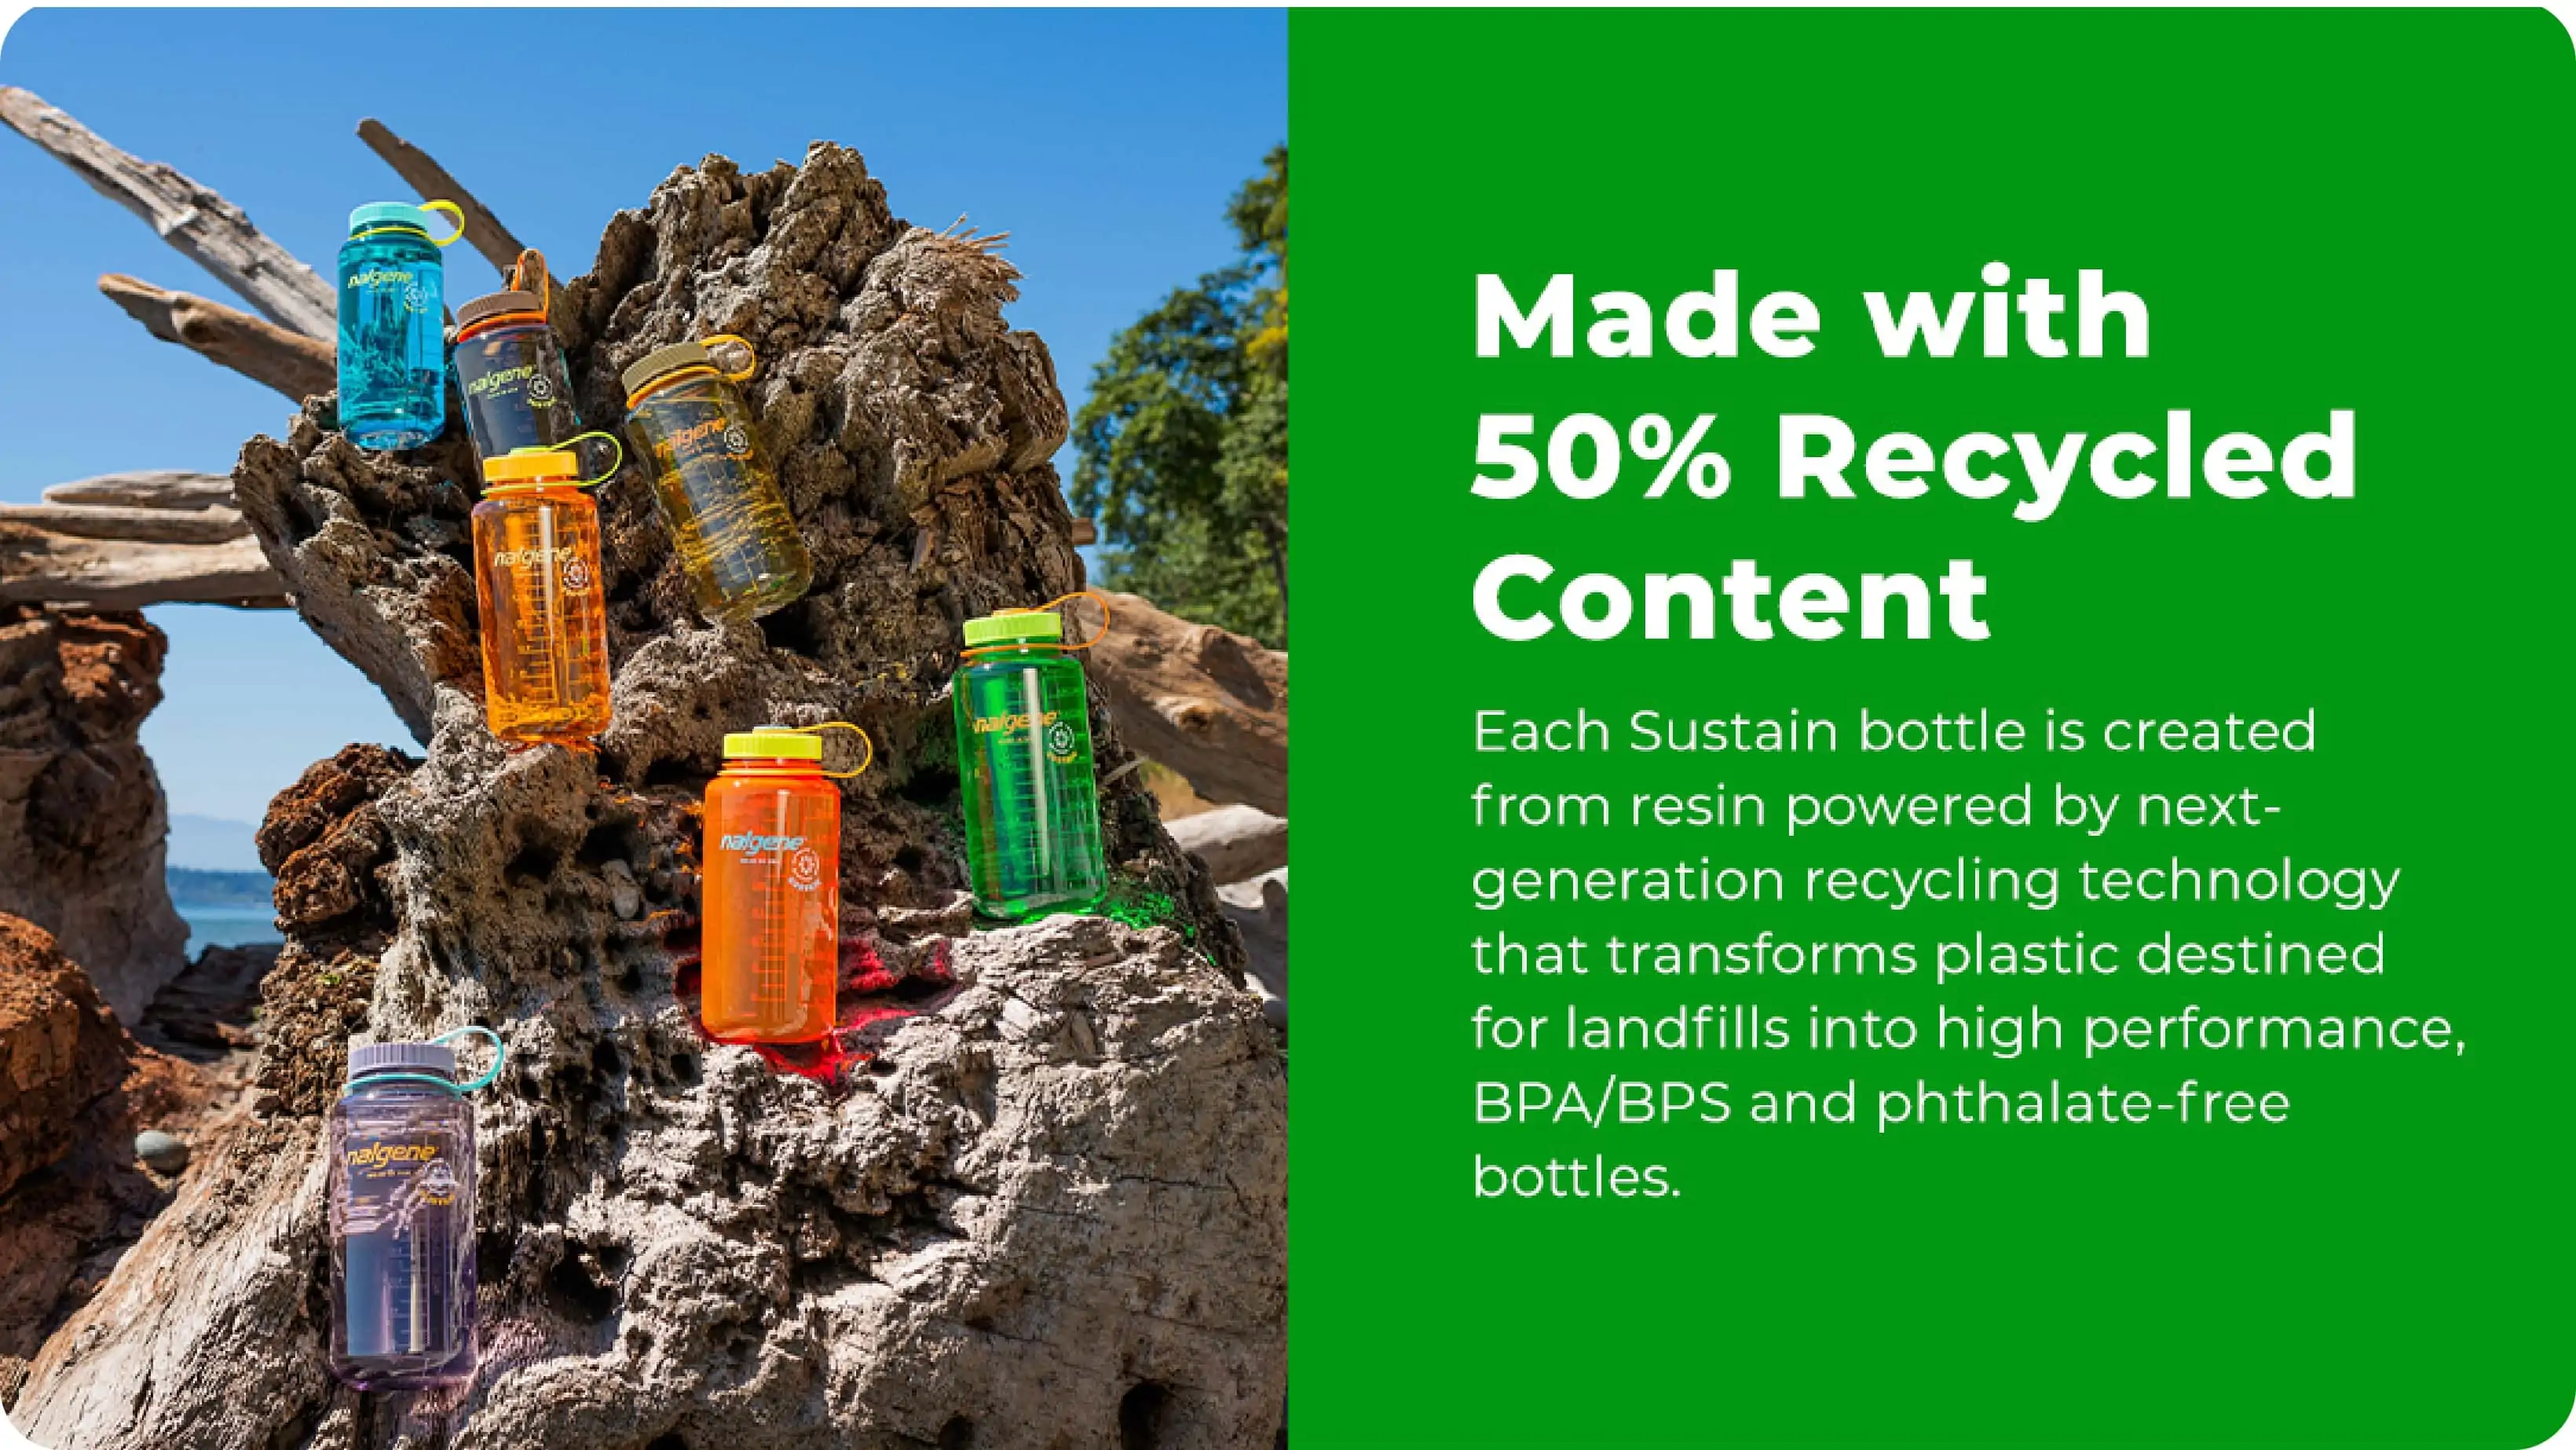 image of 7 nalgene water bottles of various colors on a stump with text to the right speaking to their sustainability and that they are made with 50% recycled content